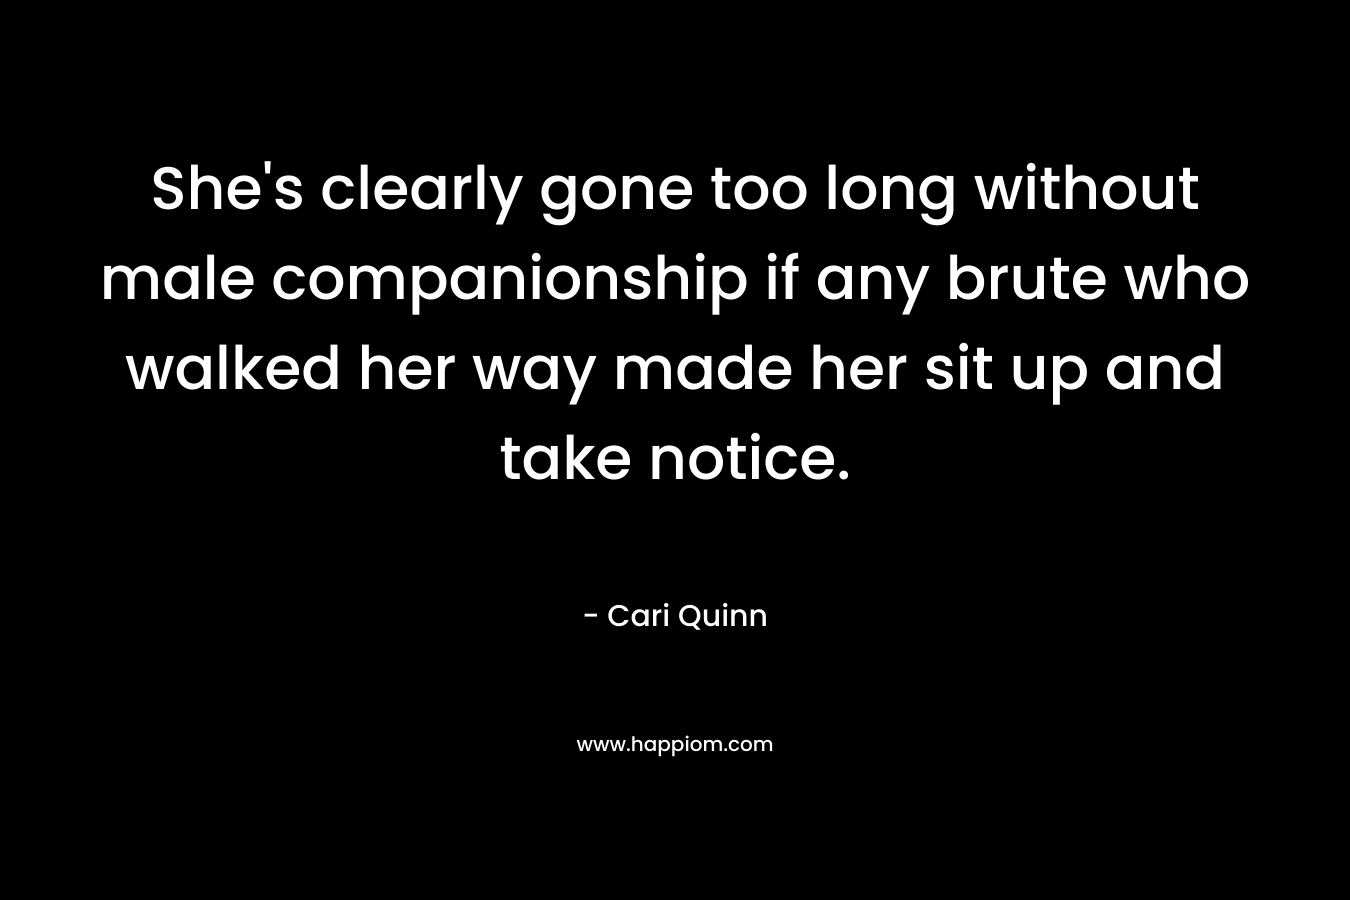 She’s clearly gone too long without male companionship if any brute who walked her way made her sit up and take notice. – Cari Quinn